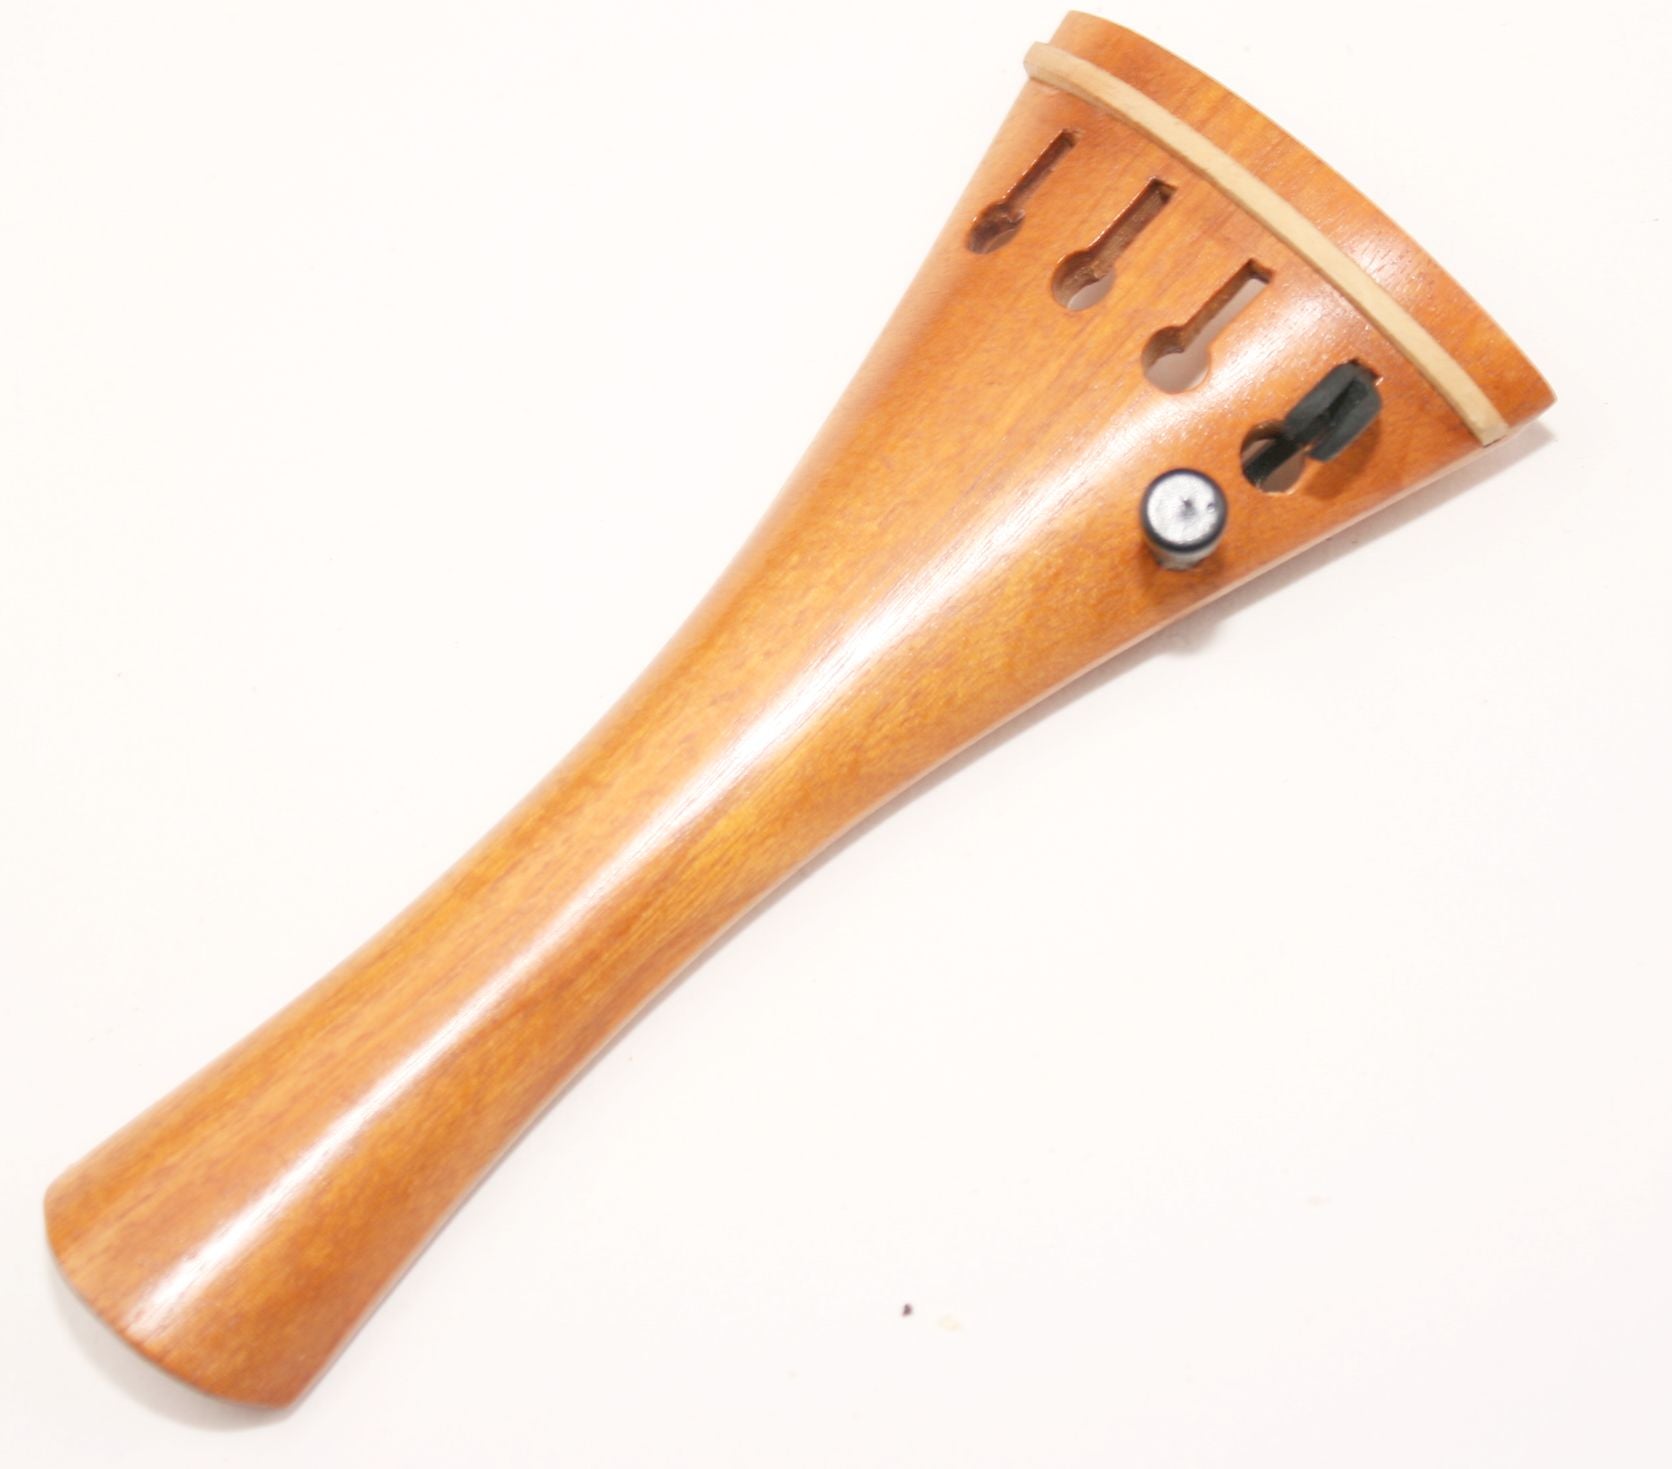 Violin tailpiece-French-"Schmidt"-Pernambuco-whiite saddle- 1 carbon fiber tuner- 110mm.